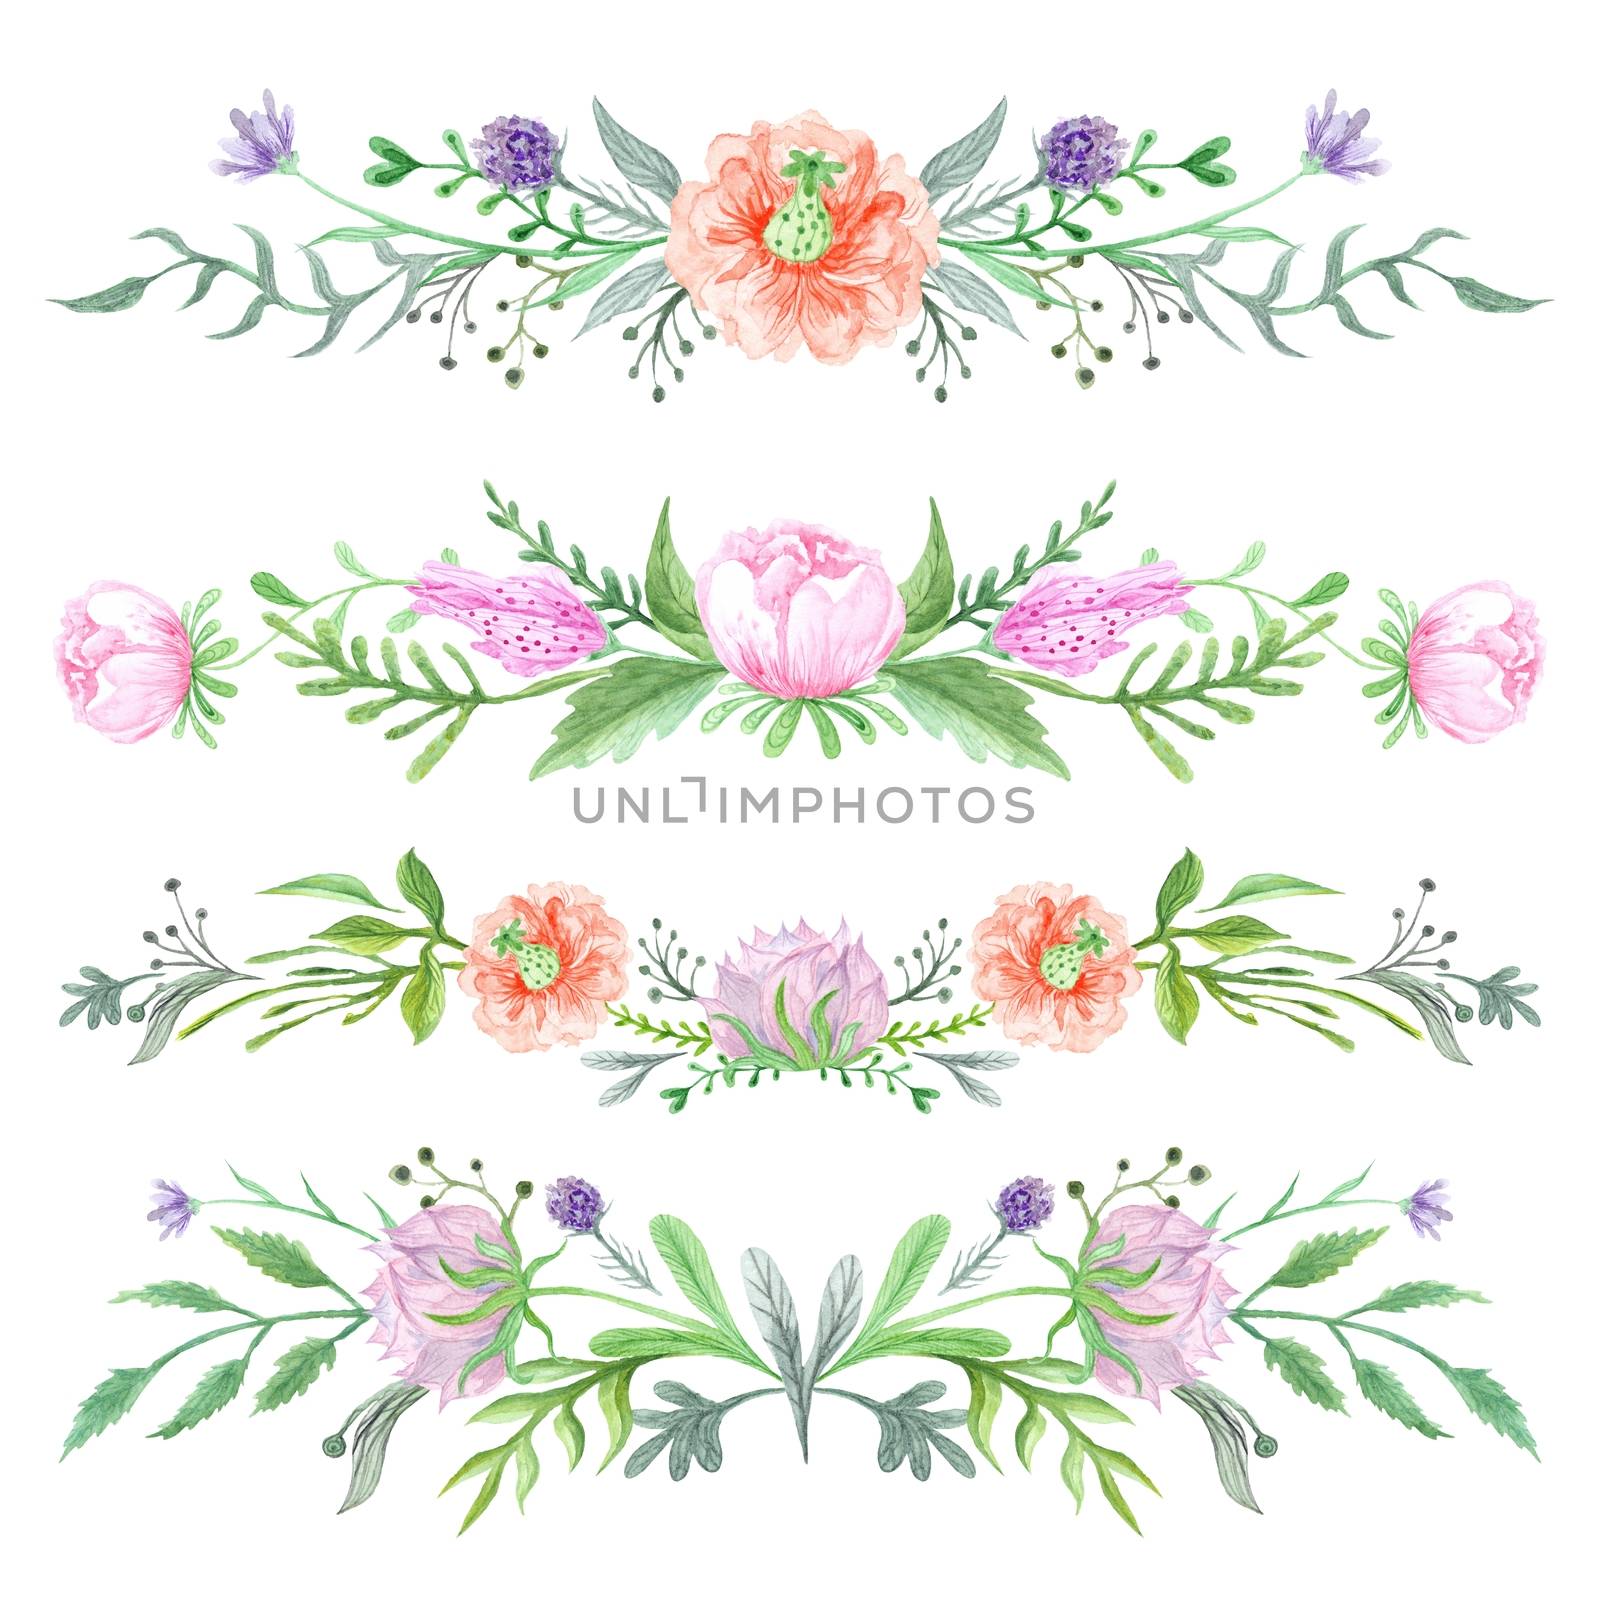 Romantic elegant borders with wild herbs and meadow flowers for card, invitation, wedding design on white background